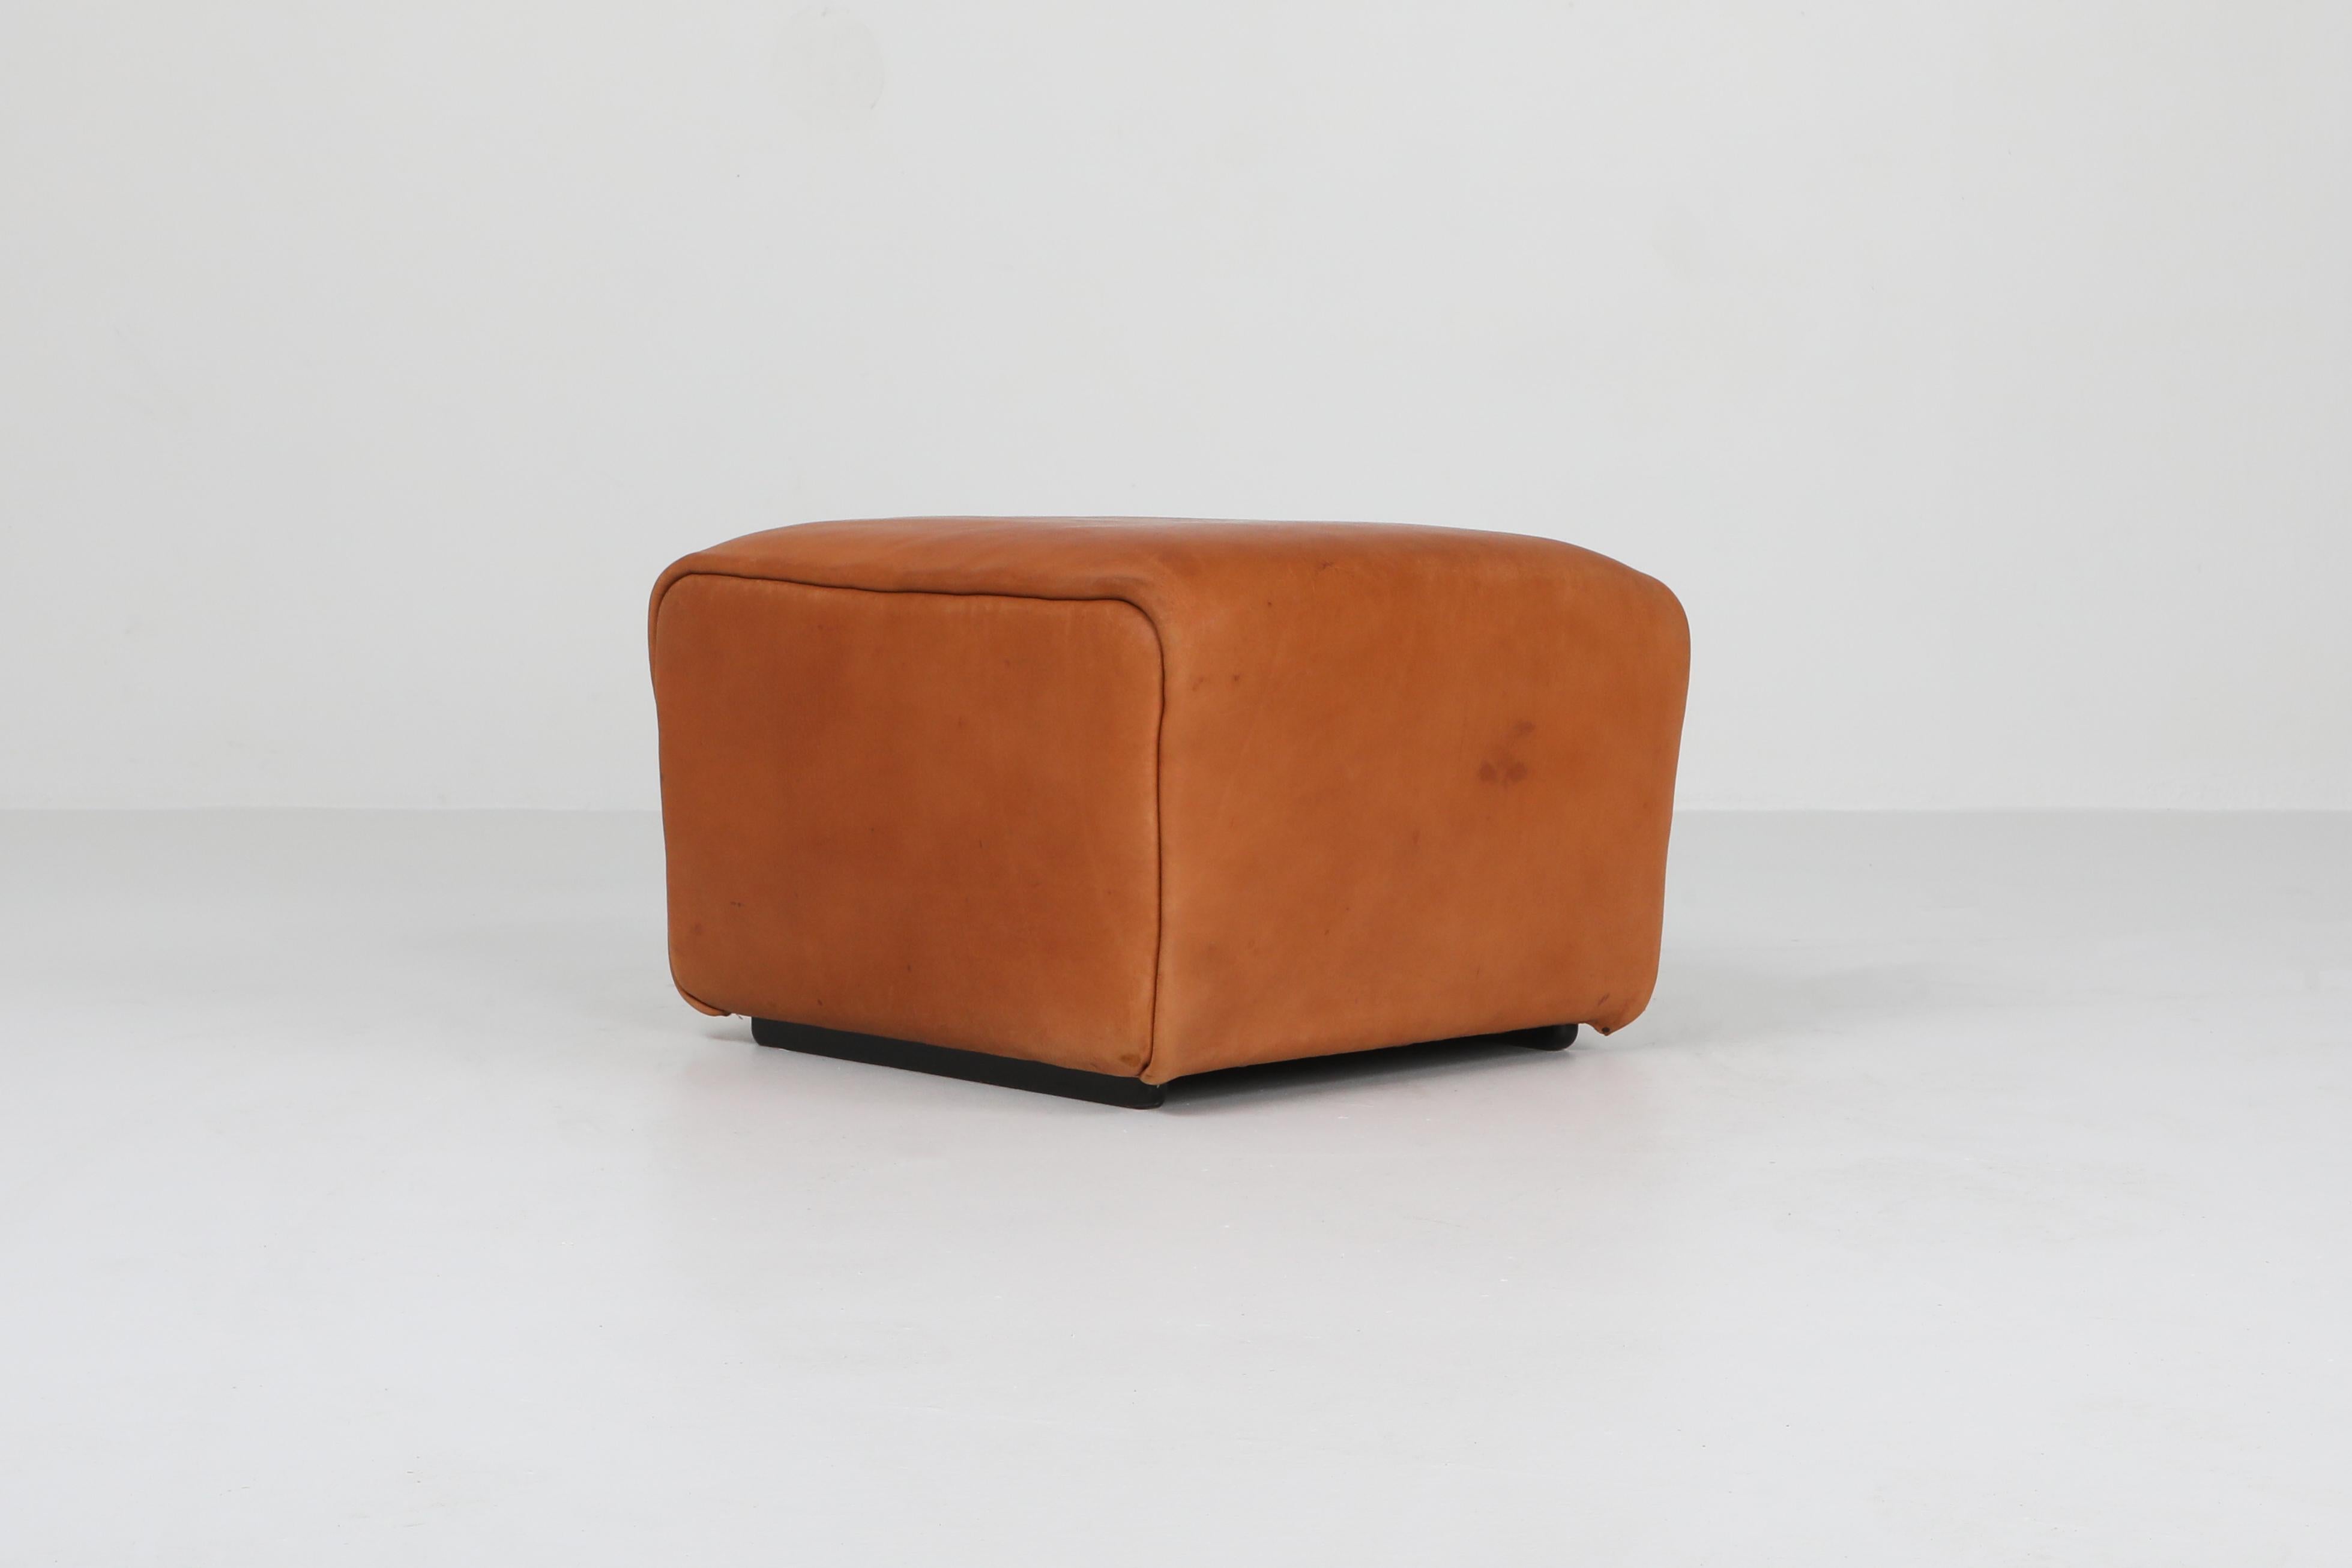 Cognac leather ottoman by Swiss manufacturer De Sede.

The DS models are true design Classics and are still in production. These are original ottomans with tons of character and a great patina you only get with age.
Thick buffalo hide